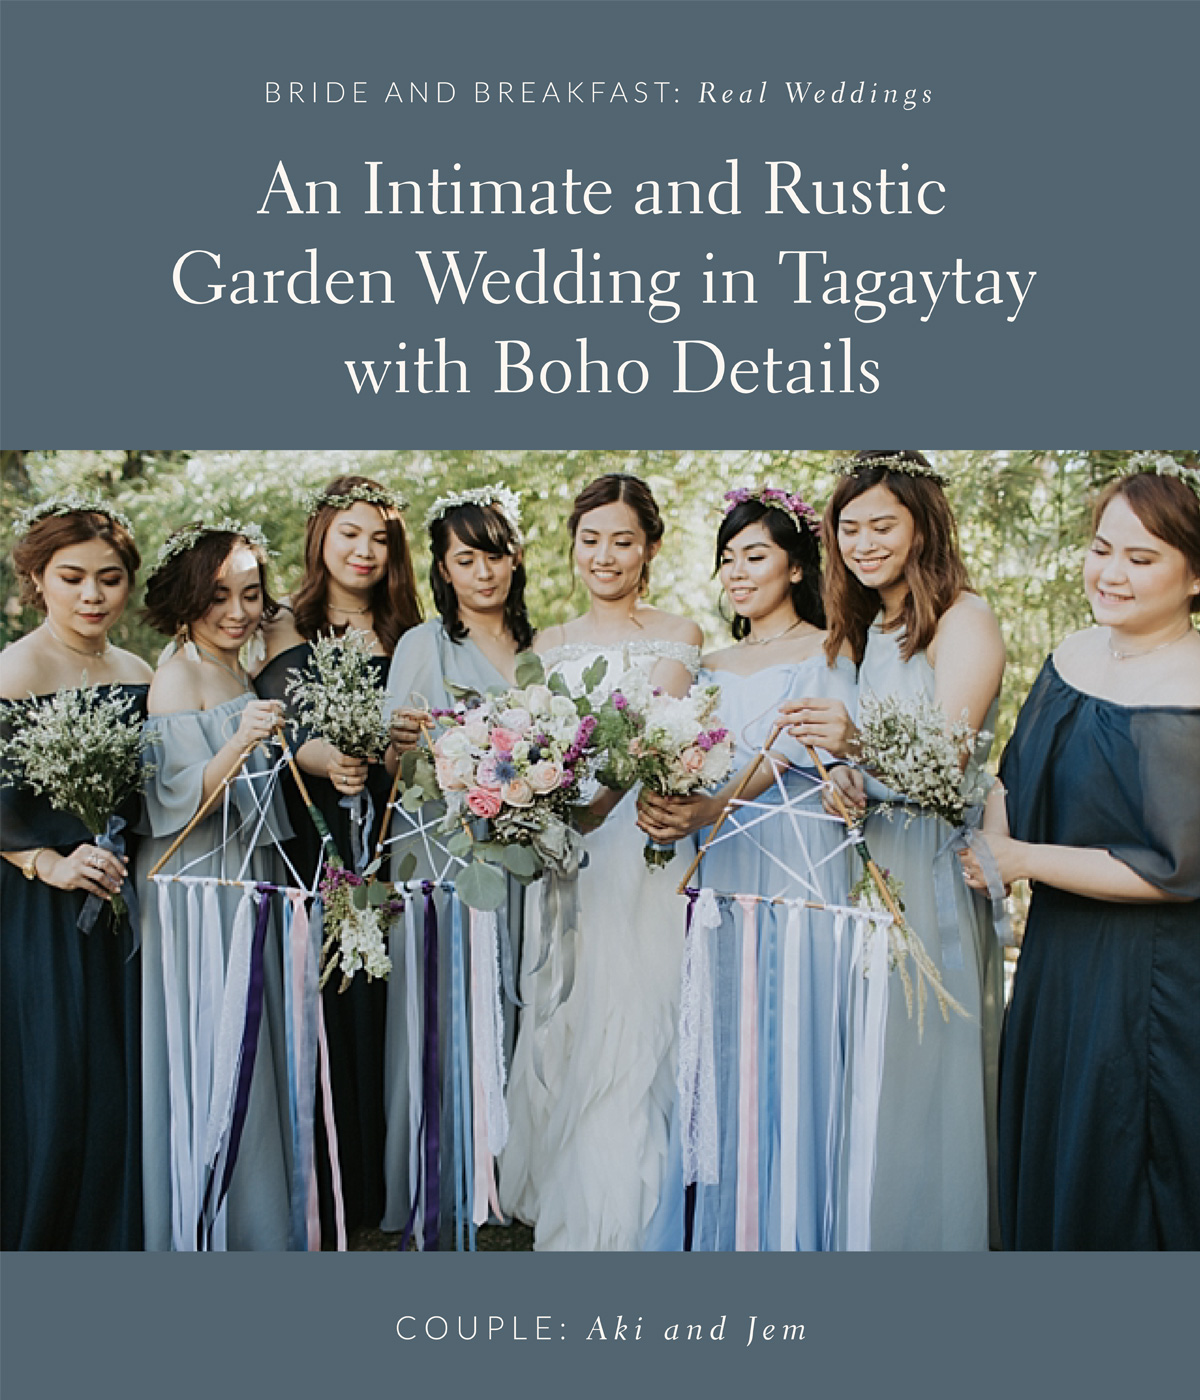 An Intimate and Rustic Garden Wedding in Tagaytay with Boho Details